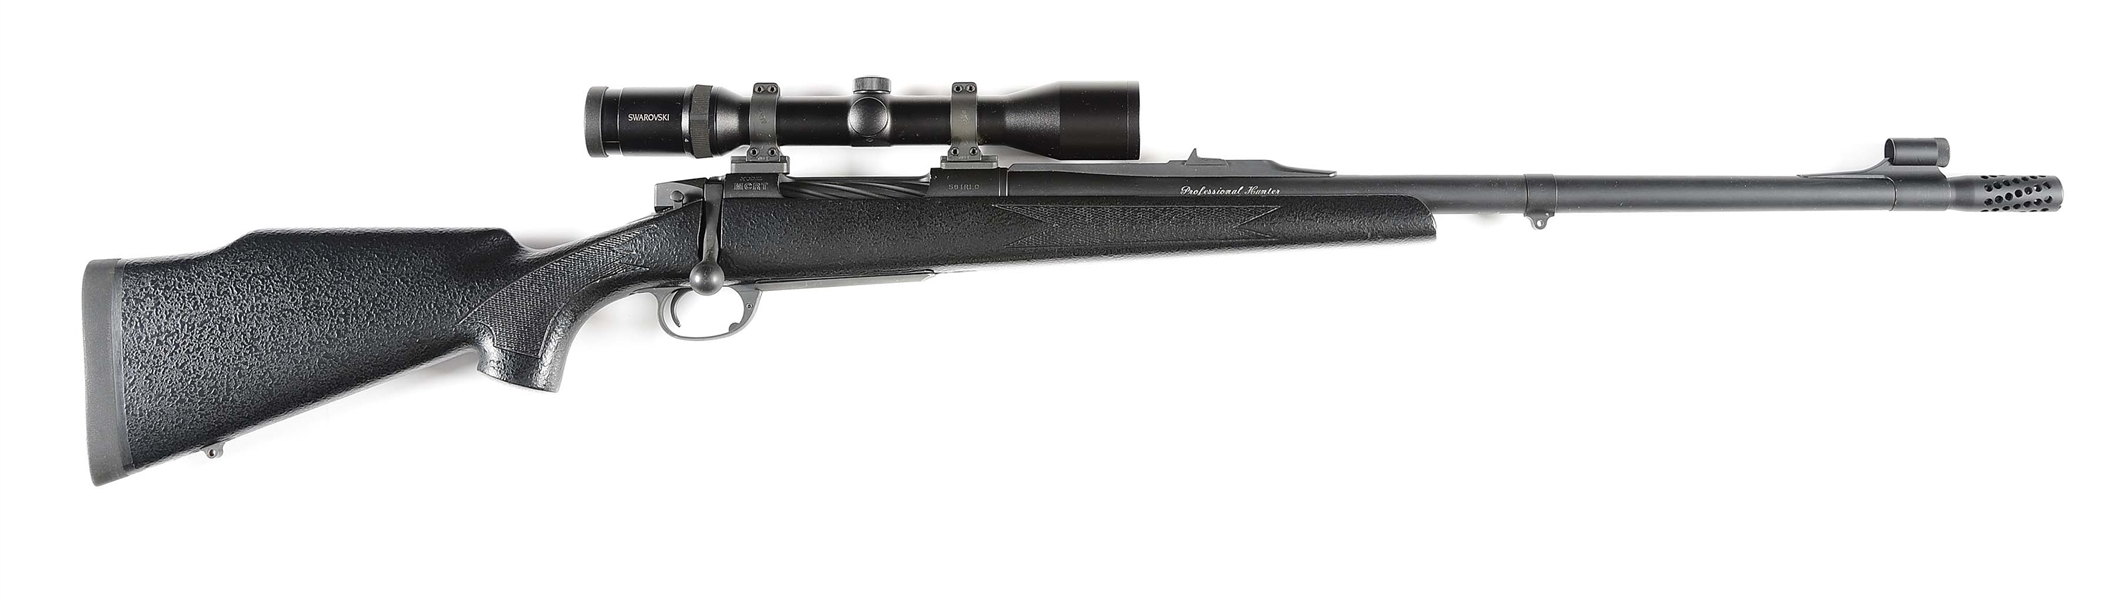 (M) JARRETT PROFESSIONAL HUNTER .450 RIGBY BOLT ACTION RIFLE WITH SCOPE BUILT ON A MCMILLAN BROS ACTION.